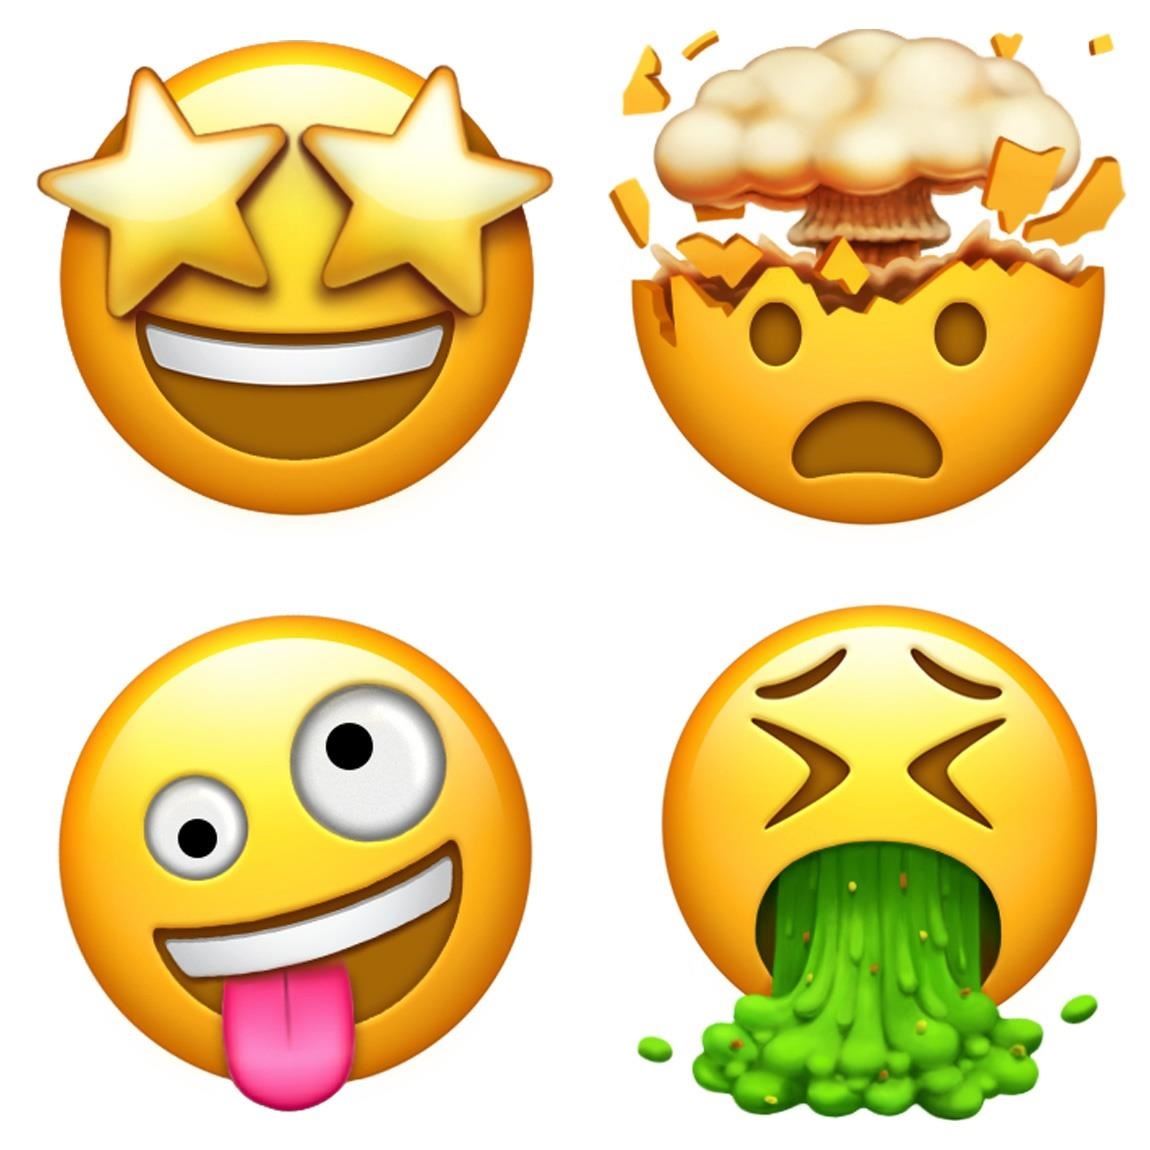 Today Is World Emoji Day & Apple's Giving Us All Gifts to Celebrate